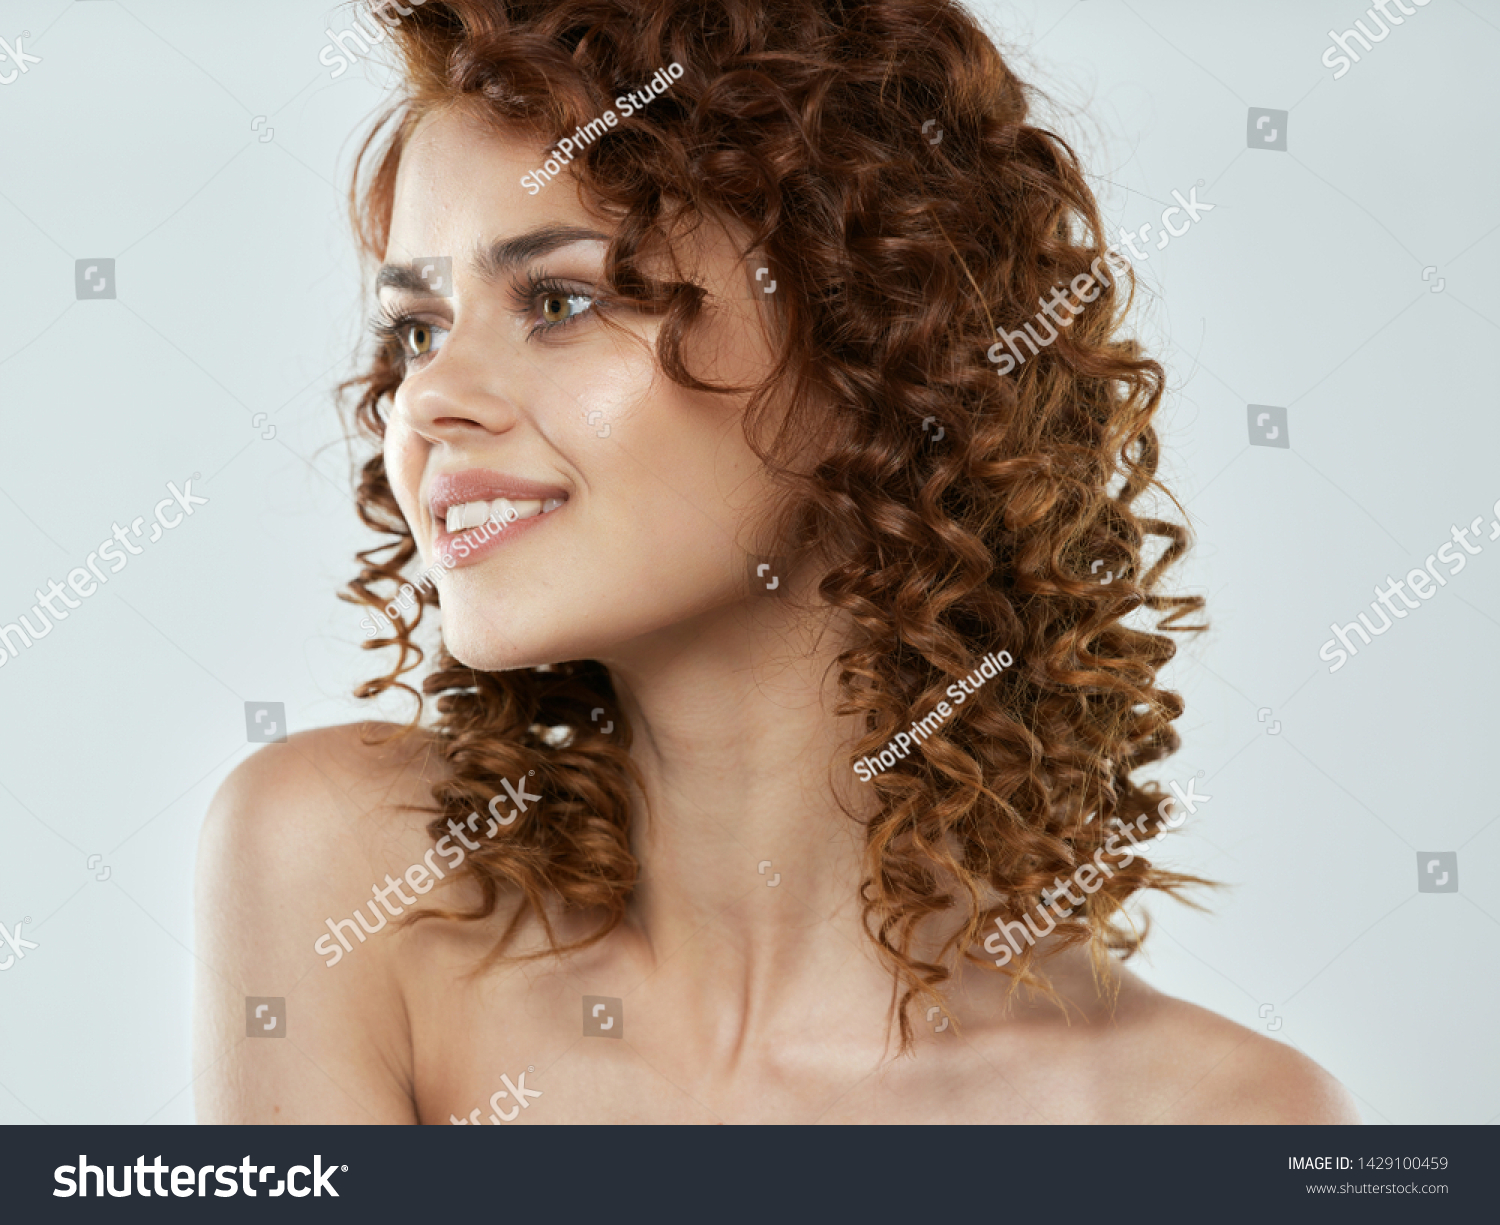 Pretty Woman Naked Shoulders Curly Hair Stock Photo Edit Now